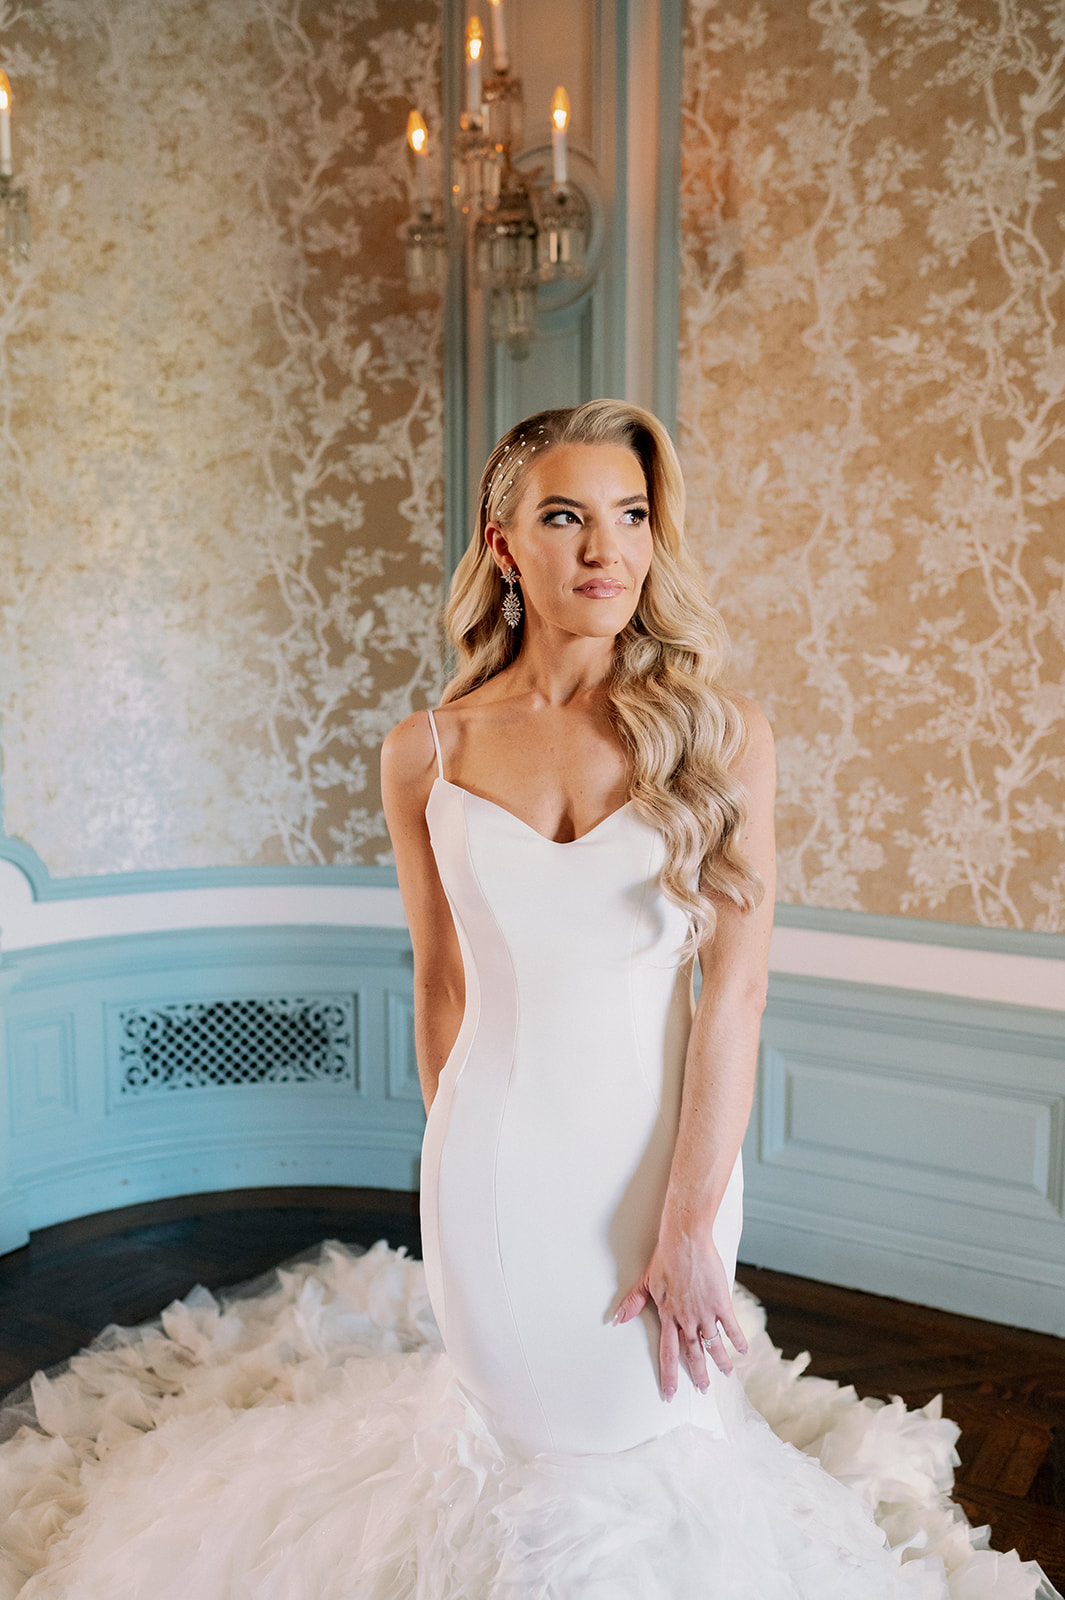 Bridal portraits in the Bourne Mansion.